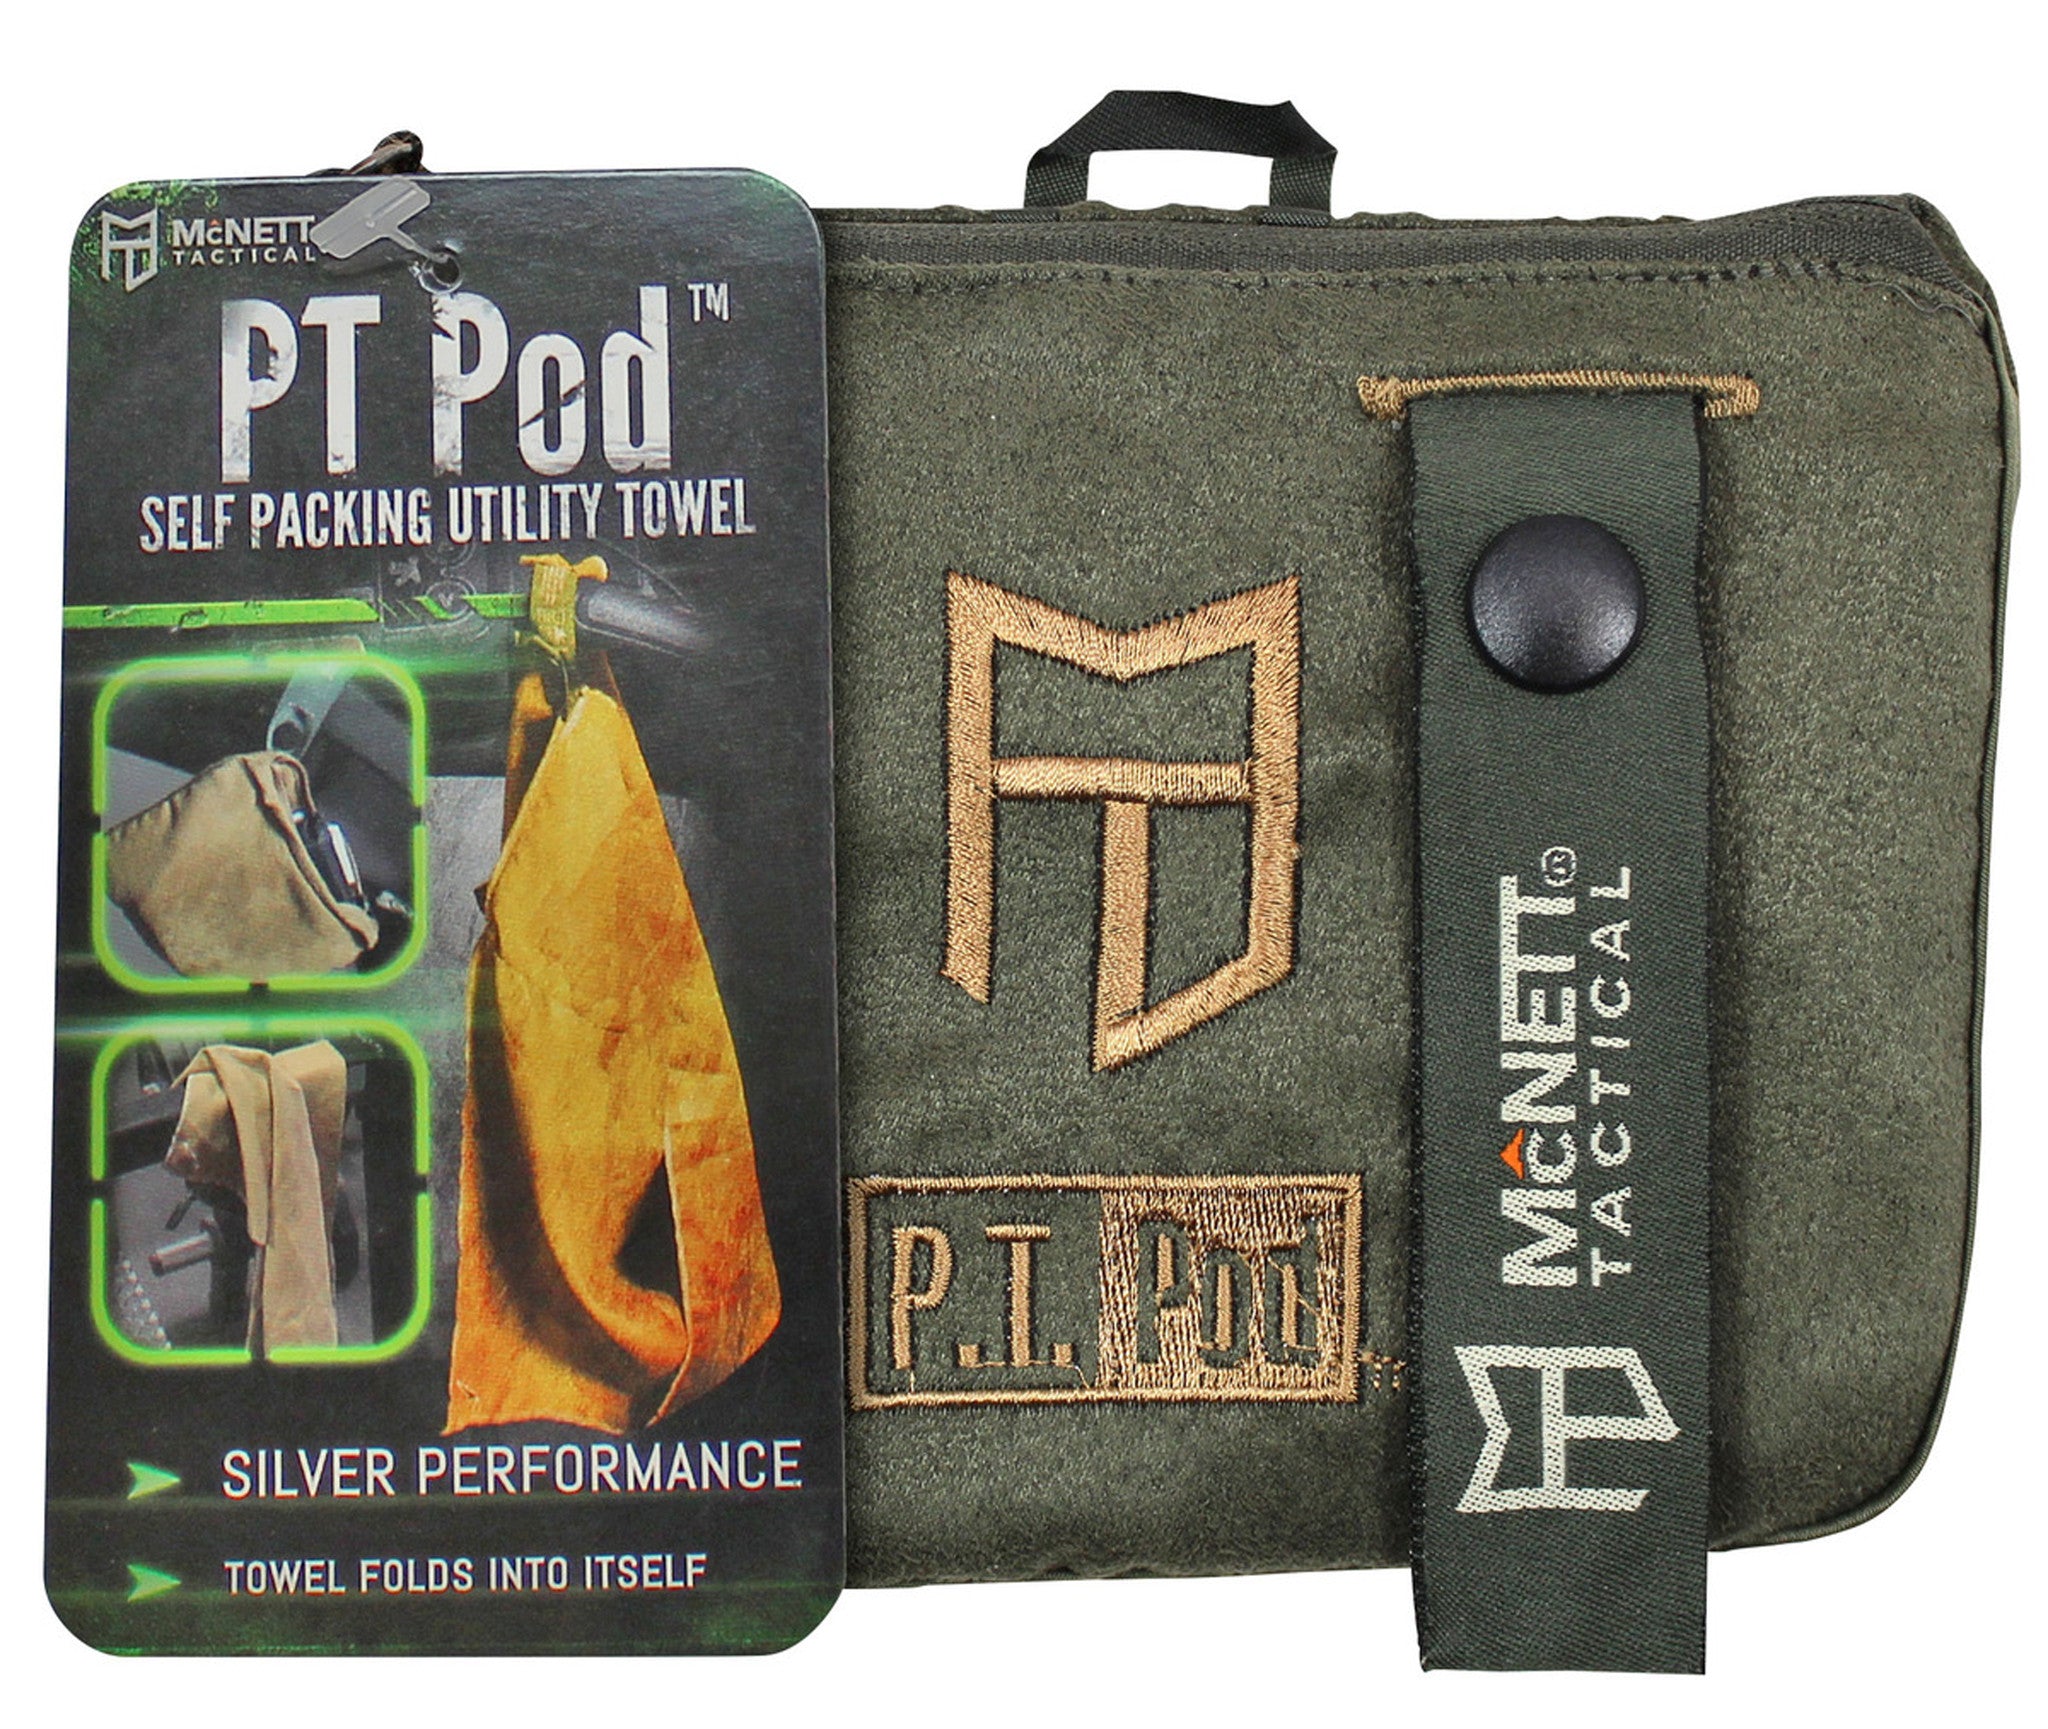 PT Pod Exercise Towel for Physical Fitness Training – GEAR AID